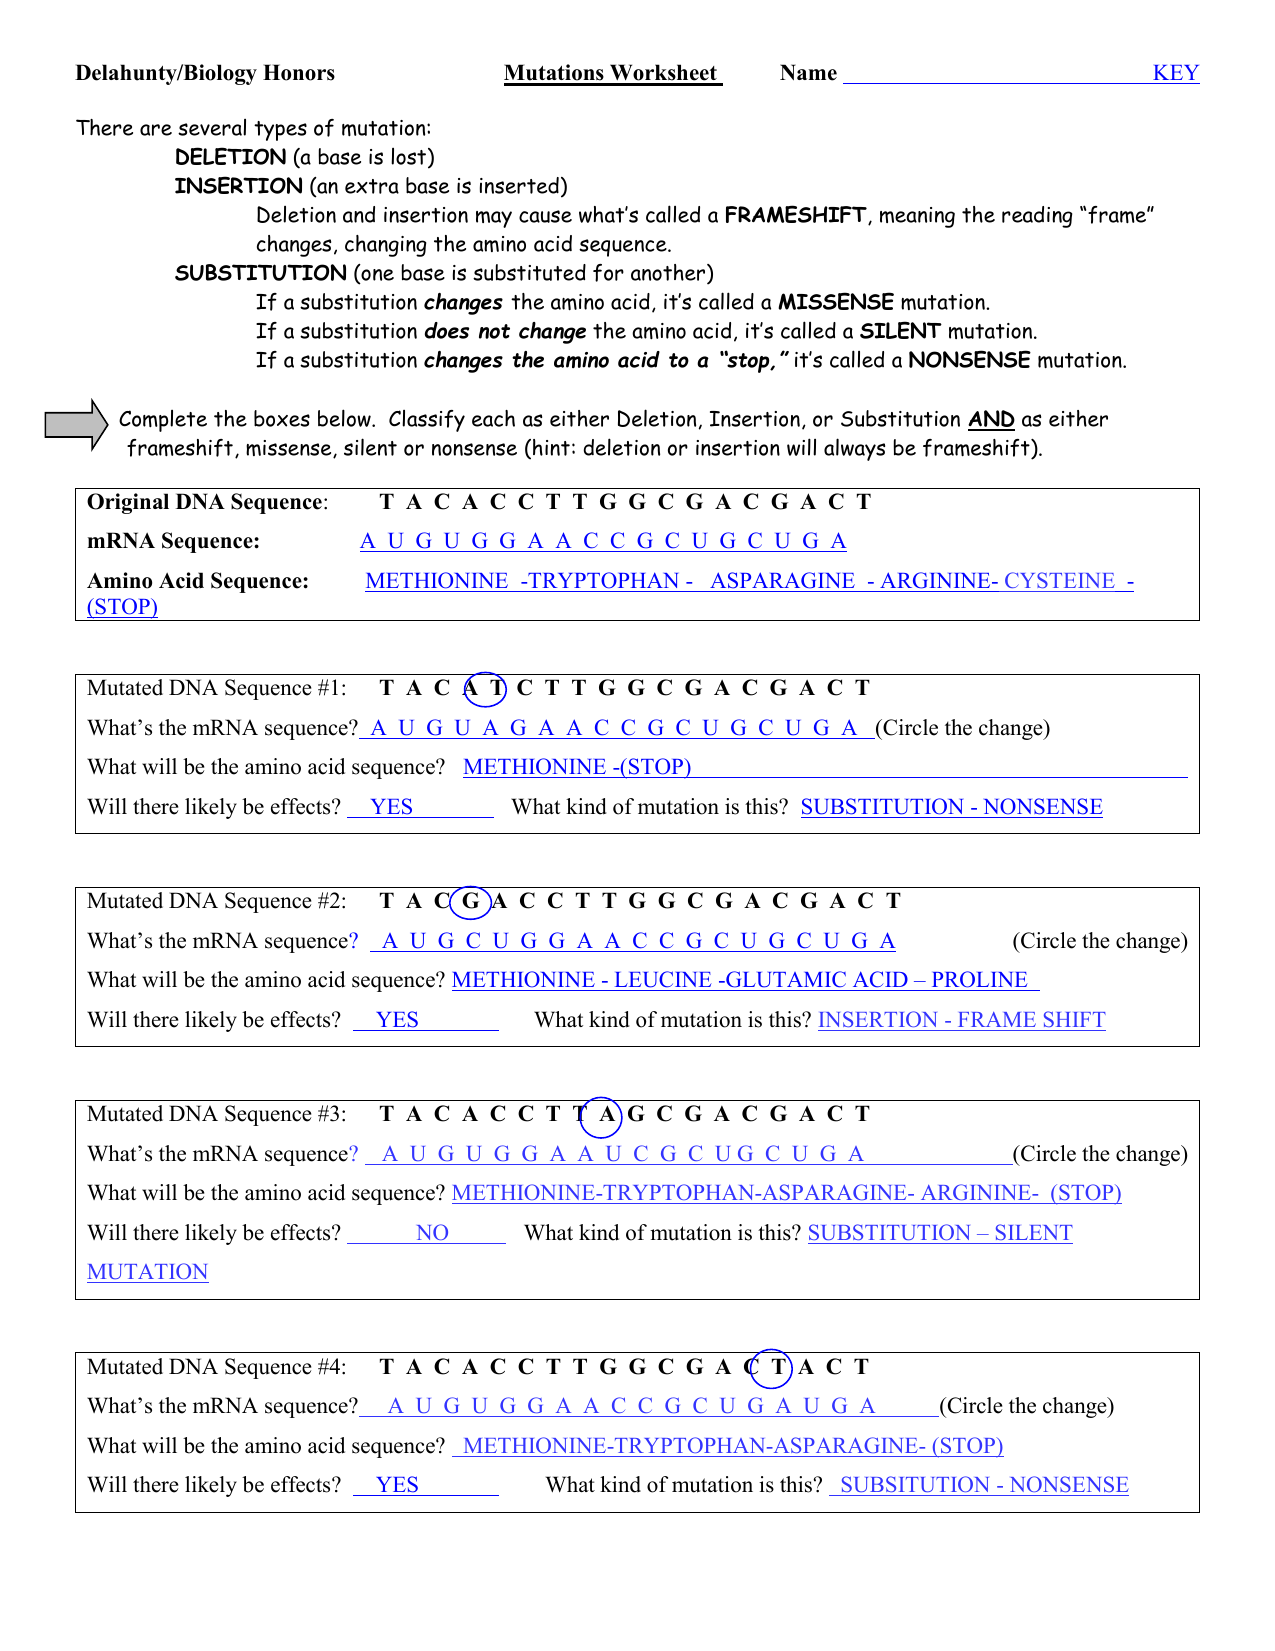 Mutations - WS - KEY With Dna Mutation Practice Worksheet Answers